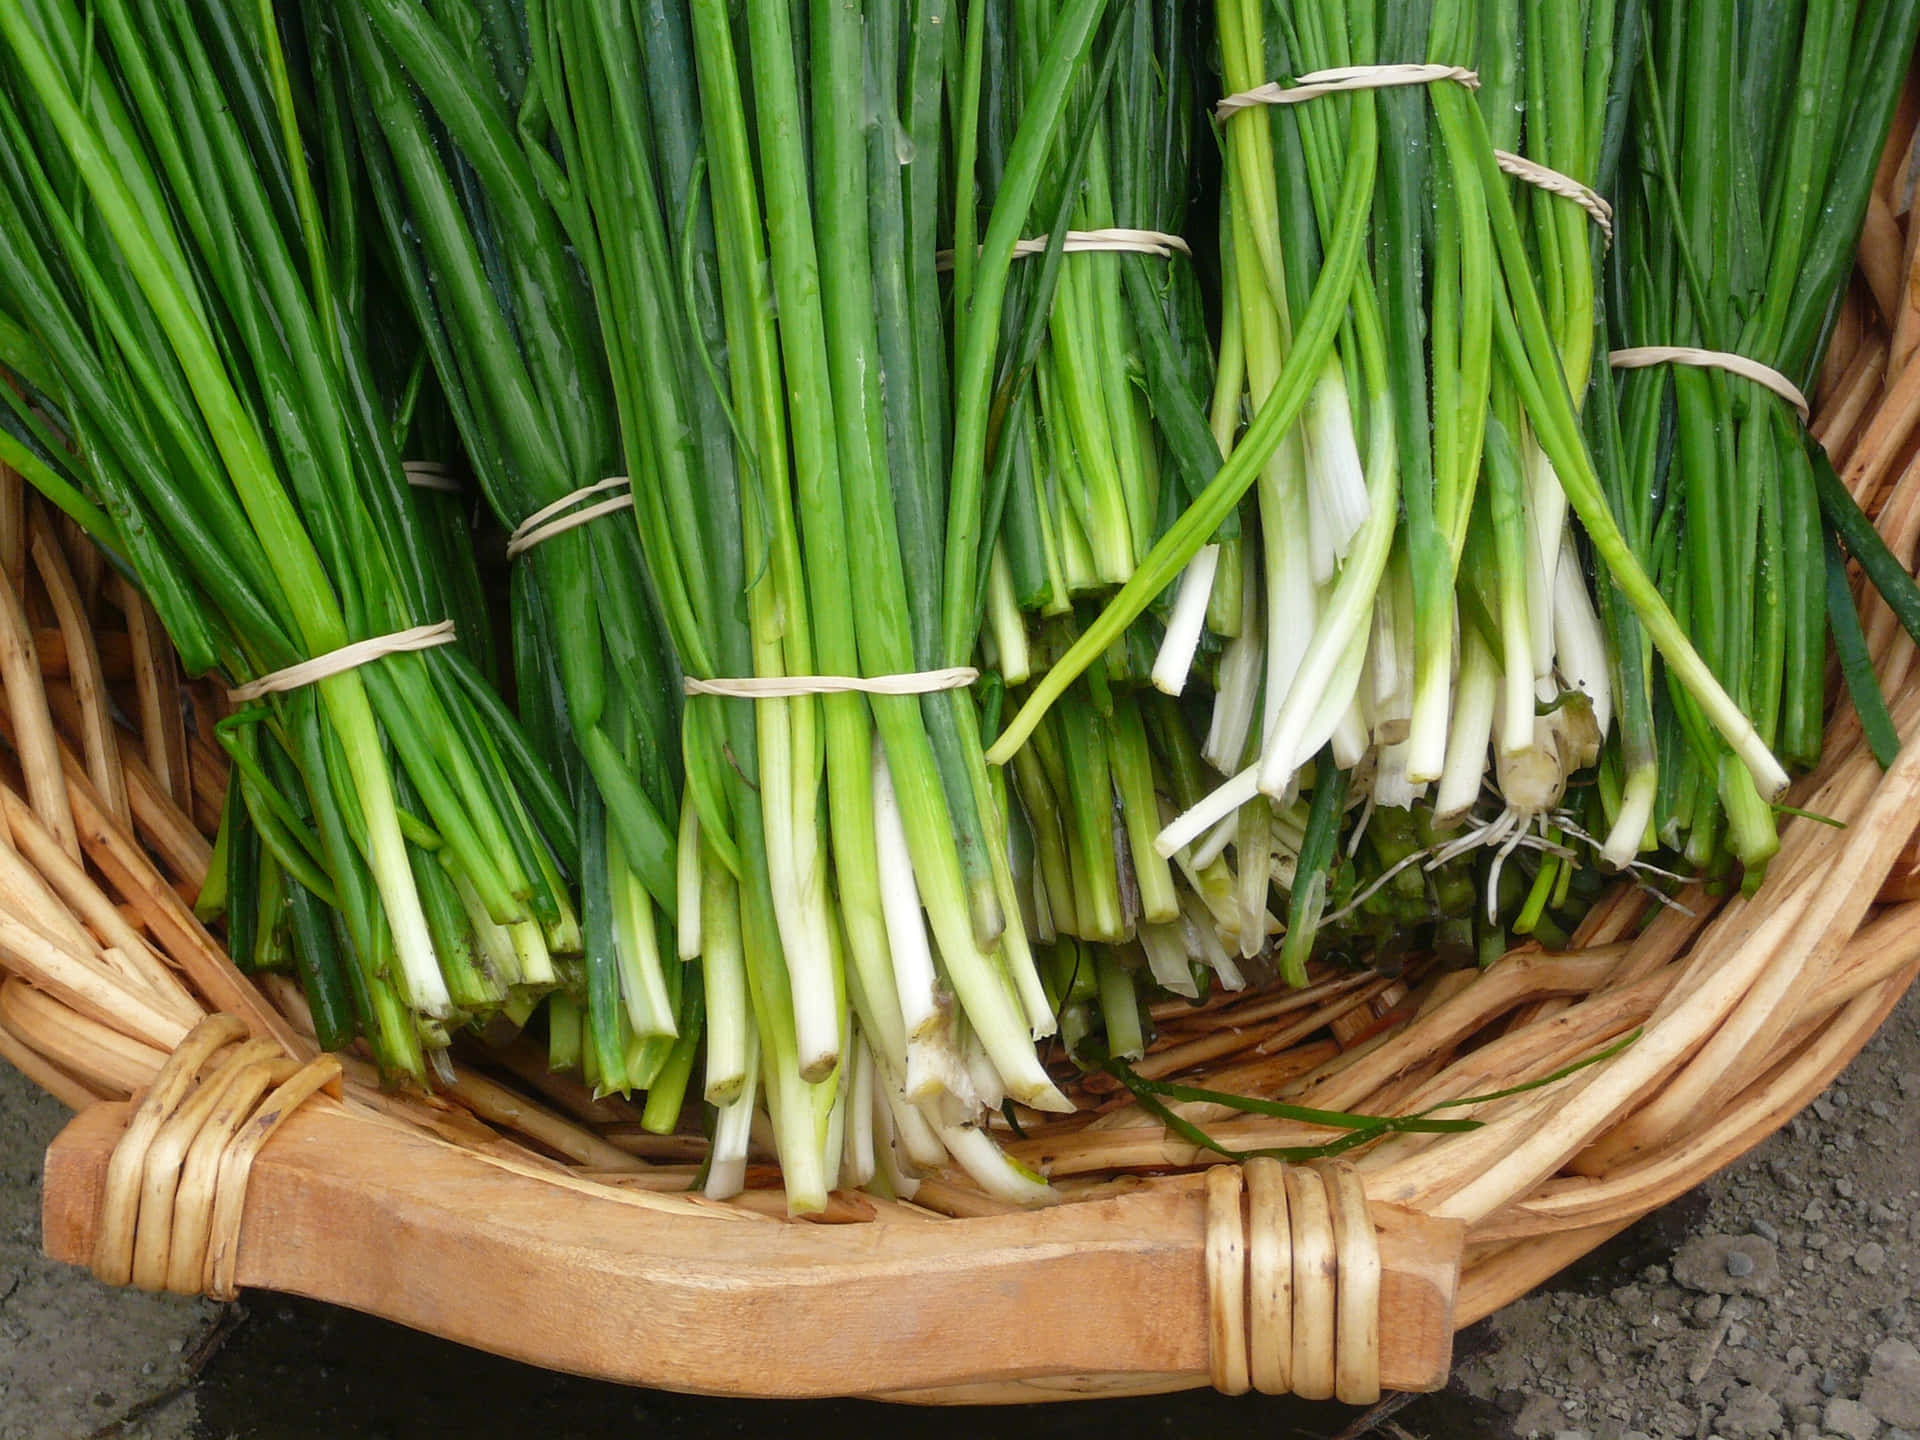 Bunches Of Green Chives On Rattan Basket Wallpaper